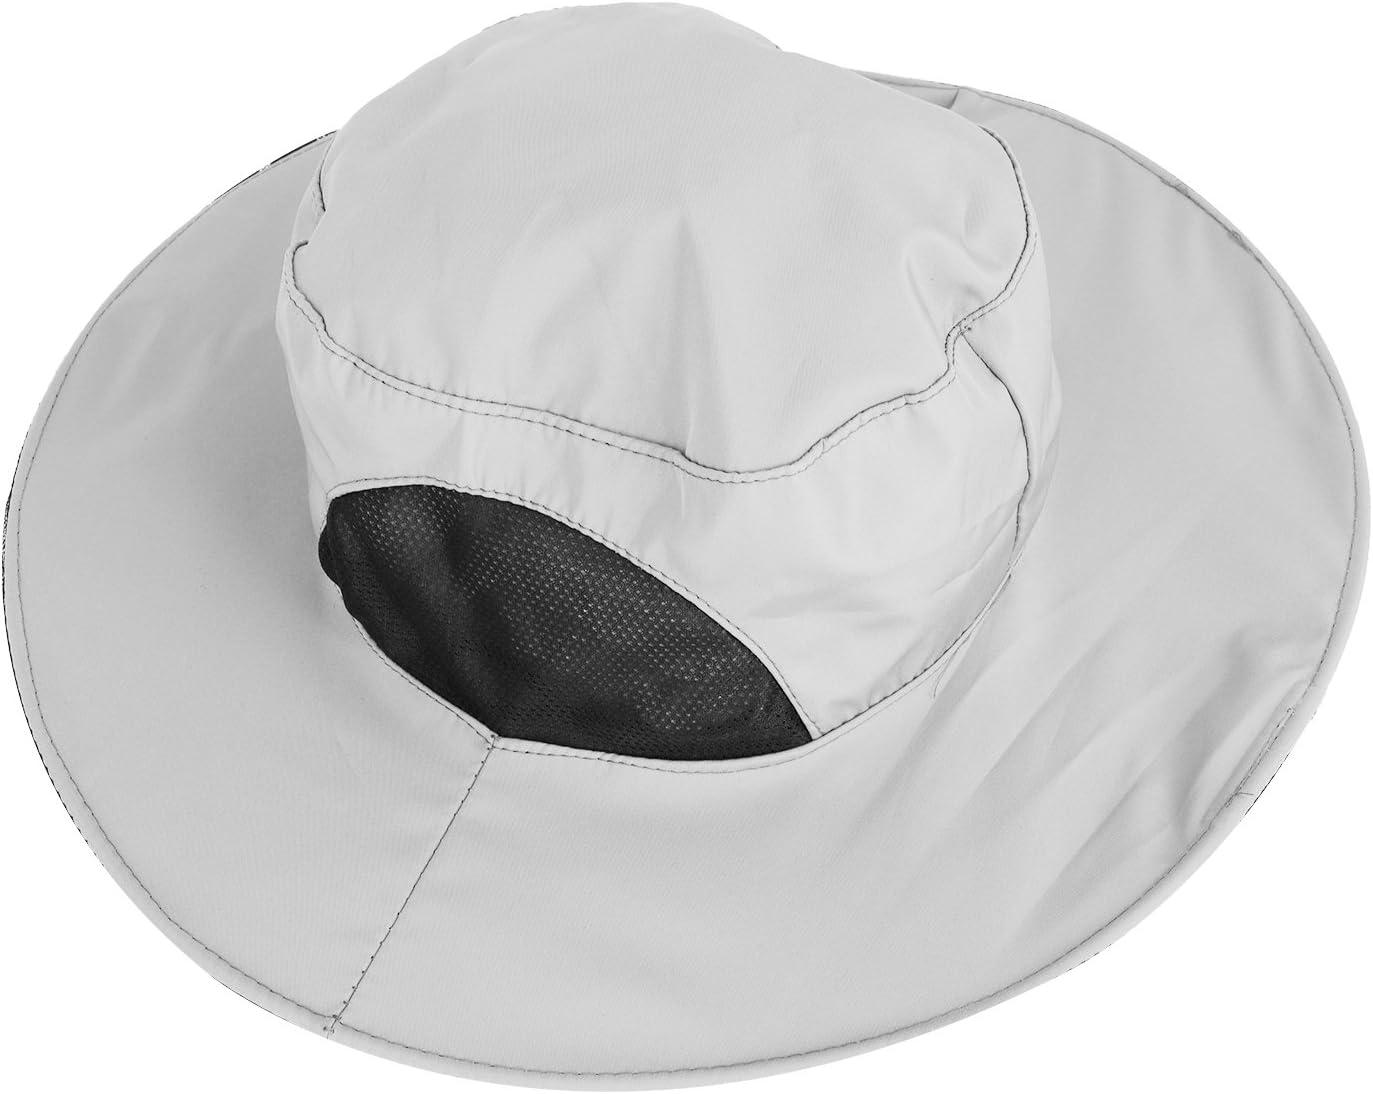 Mosquito Insect Beekeeping Bucket Hat with 7 long net for